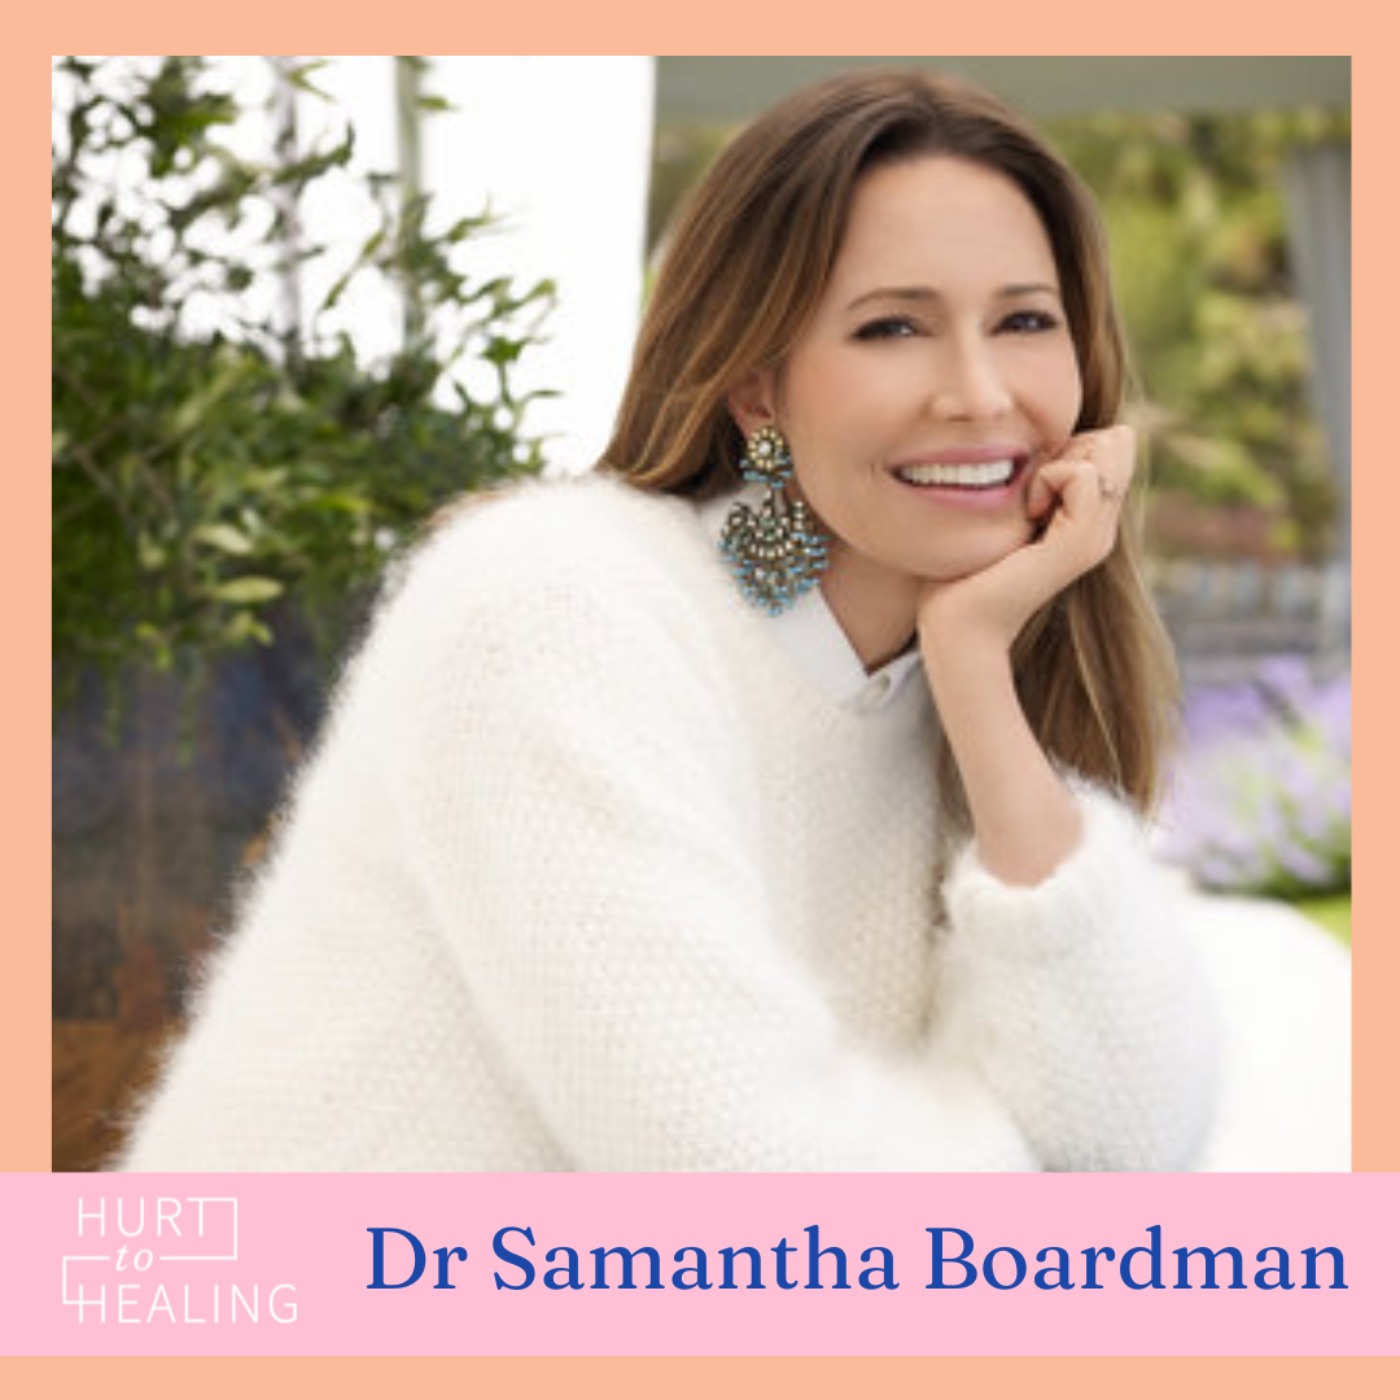 HEALING 101: Identifying mental health challenges in friends and family with Dr. Samantha Boardman